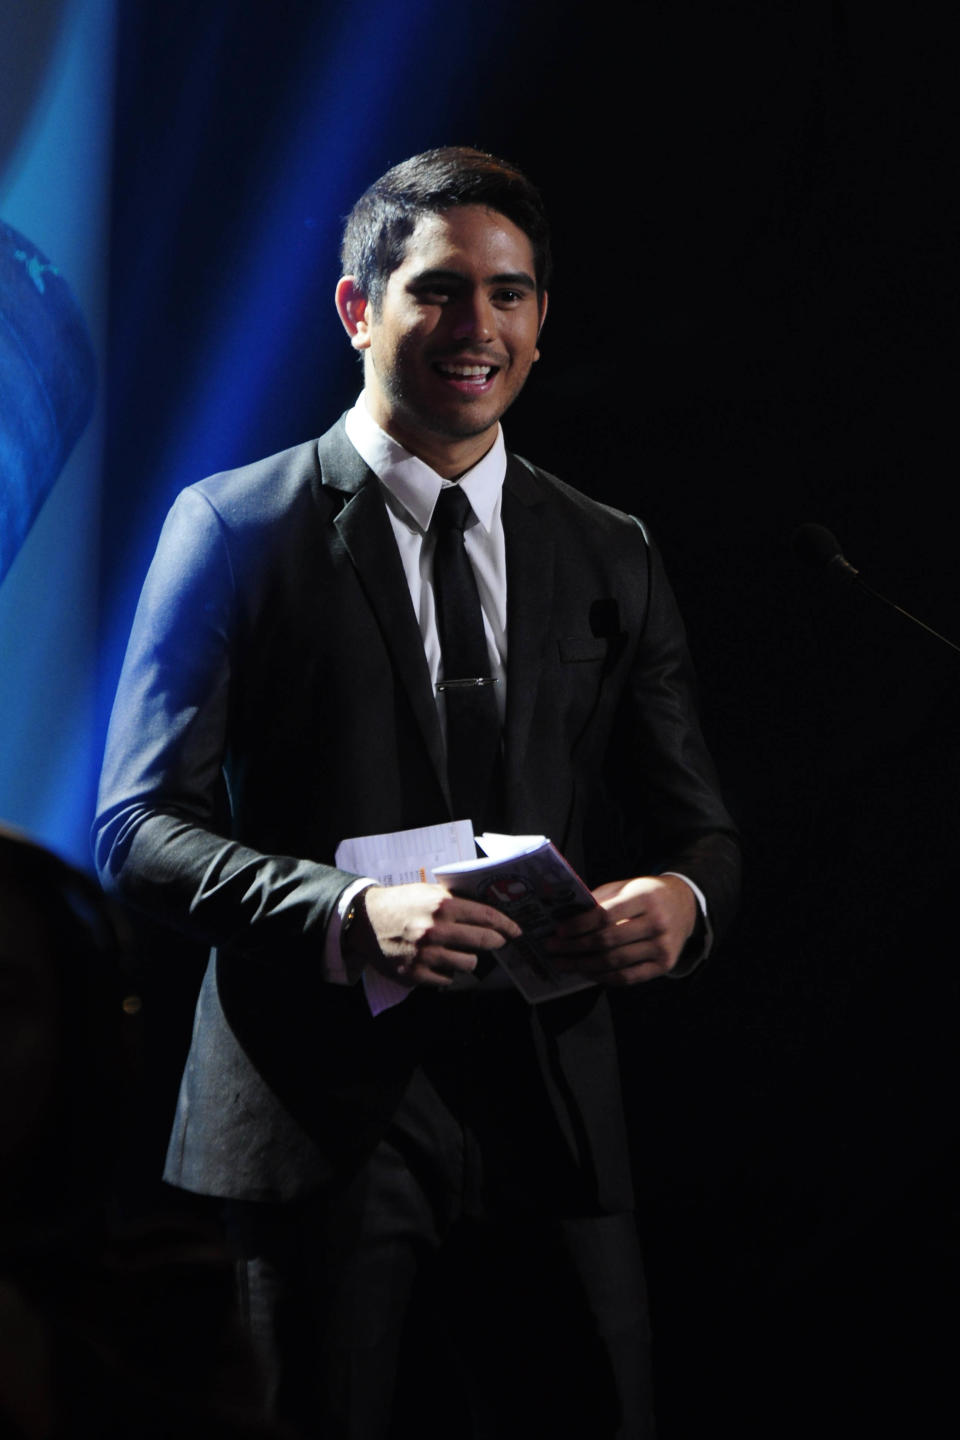 Gerald Anderson presents the award for "Best Drama Actress" during the 26th Star Awards for TV held at the Henry Lee Irwin Theater in Ateneo De Manila University on 18 November 2012. (Angela Galia/NPPA images)